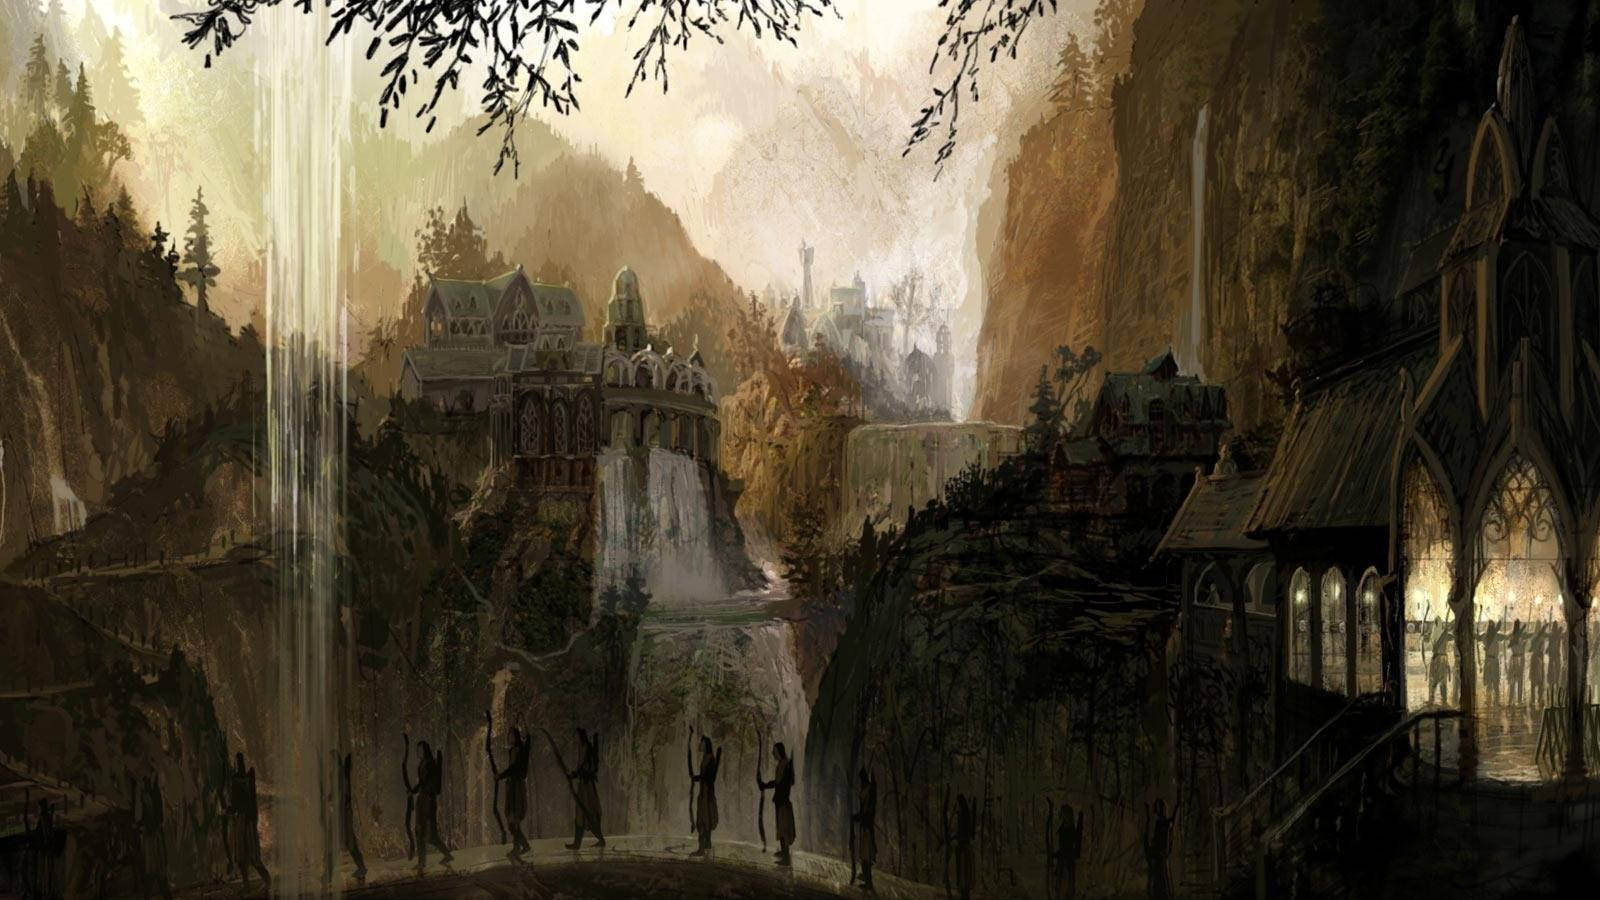 "Welcome to Rivendell - The Last Homely House East of the Sea" Wallpaper